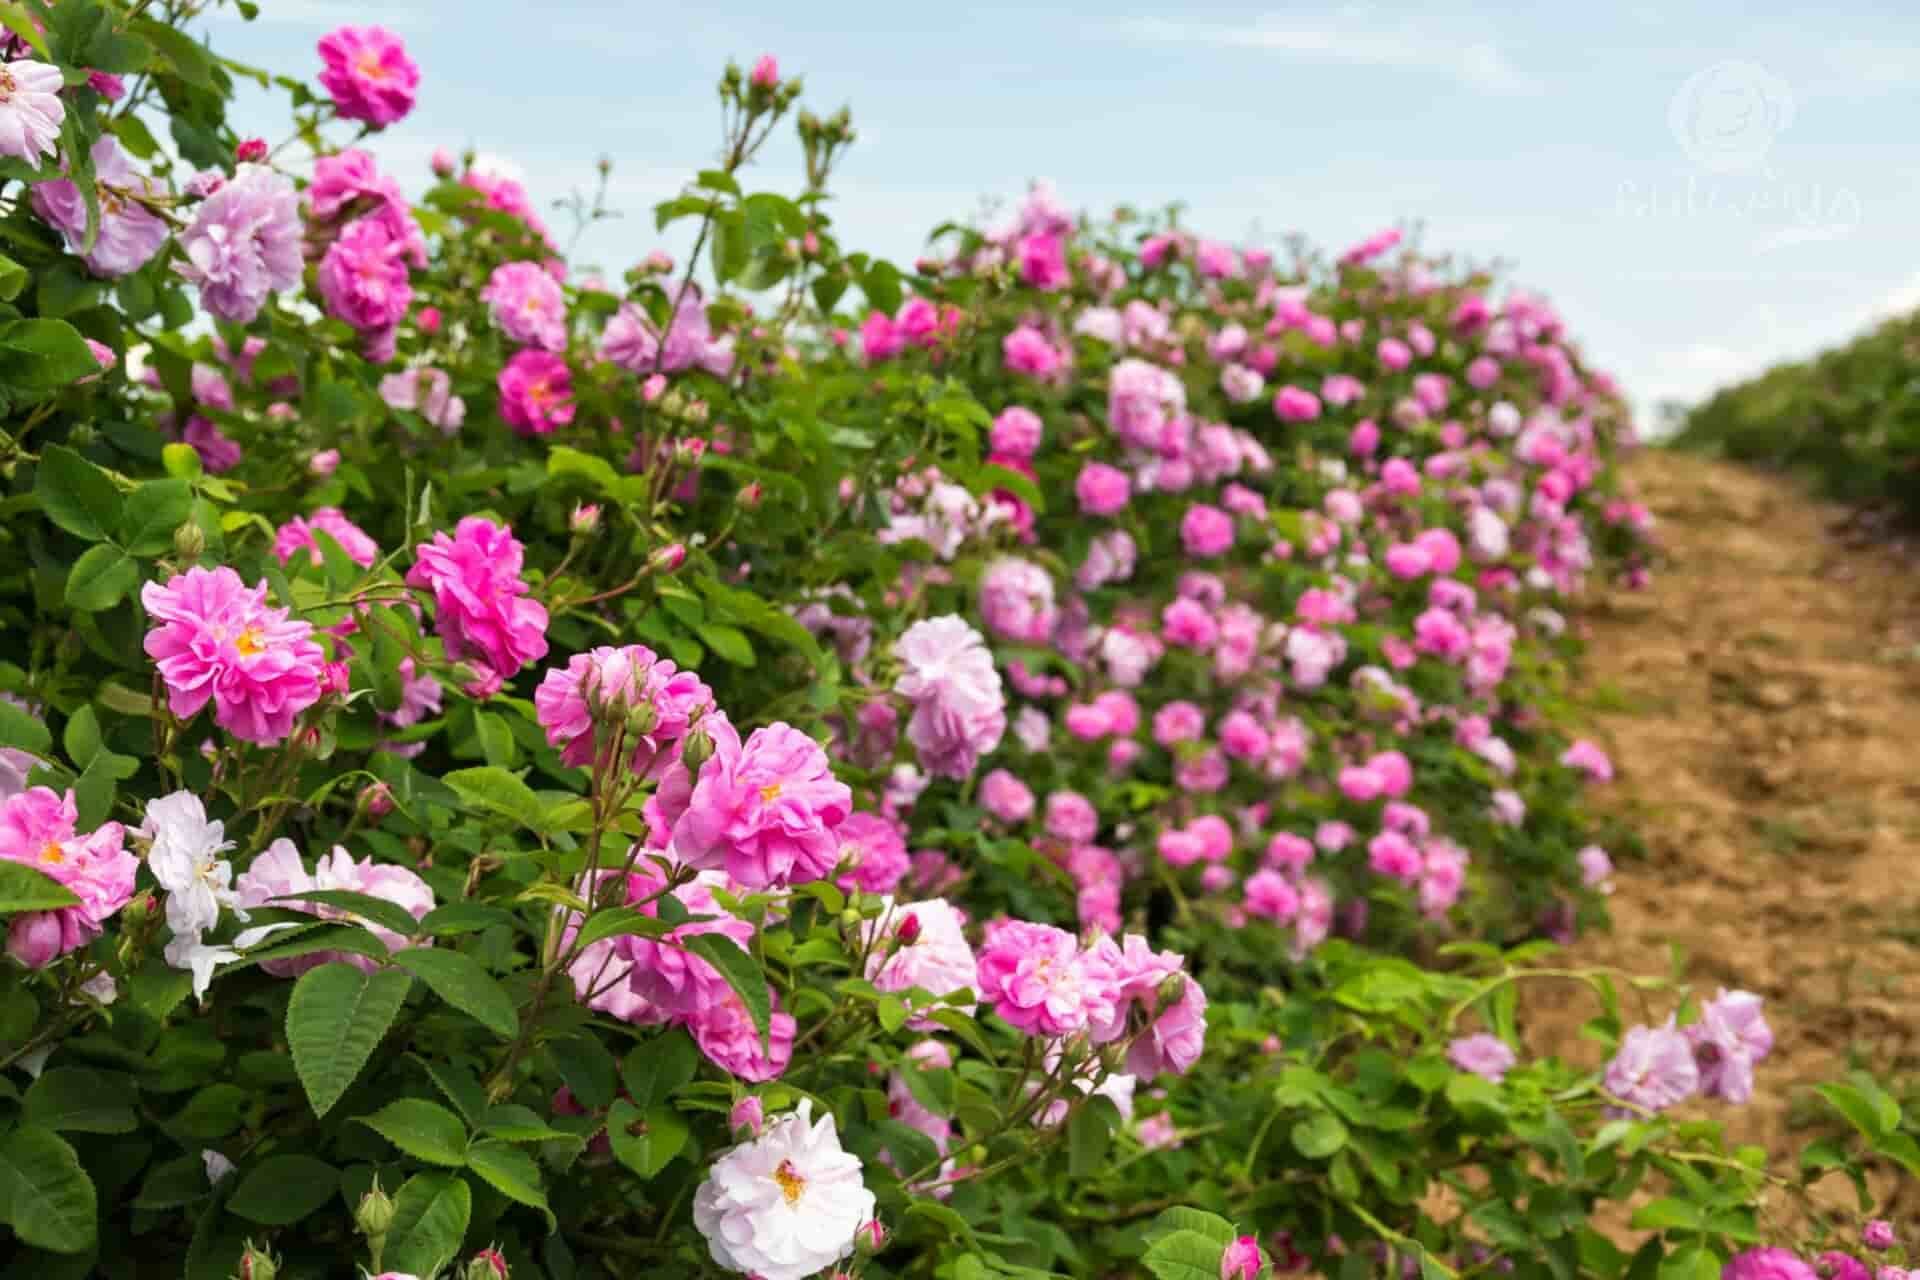 A picturesque countryside scene with a vast field of pink roses, creating a serene and beautiful landscape